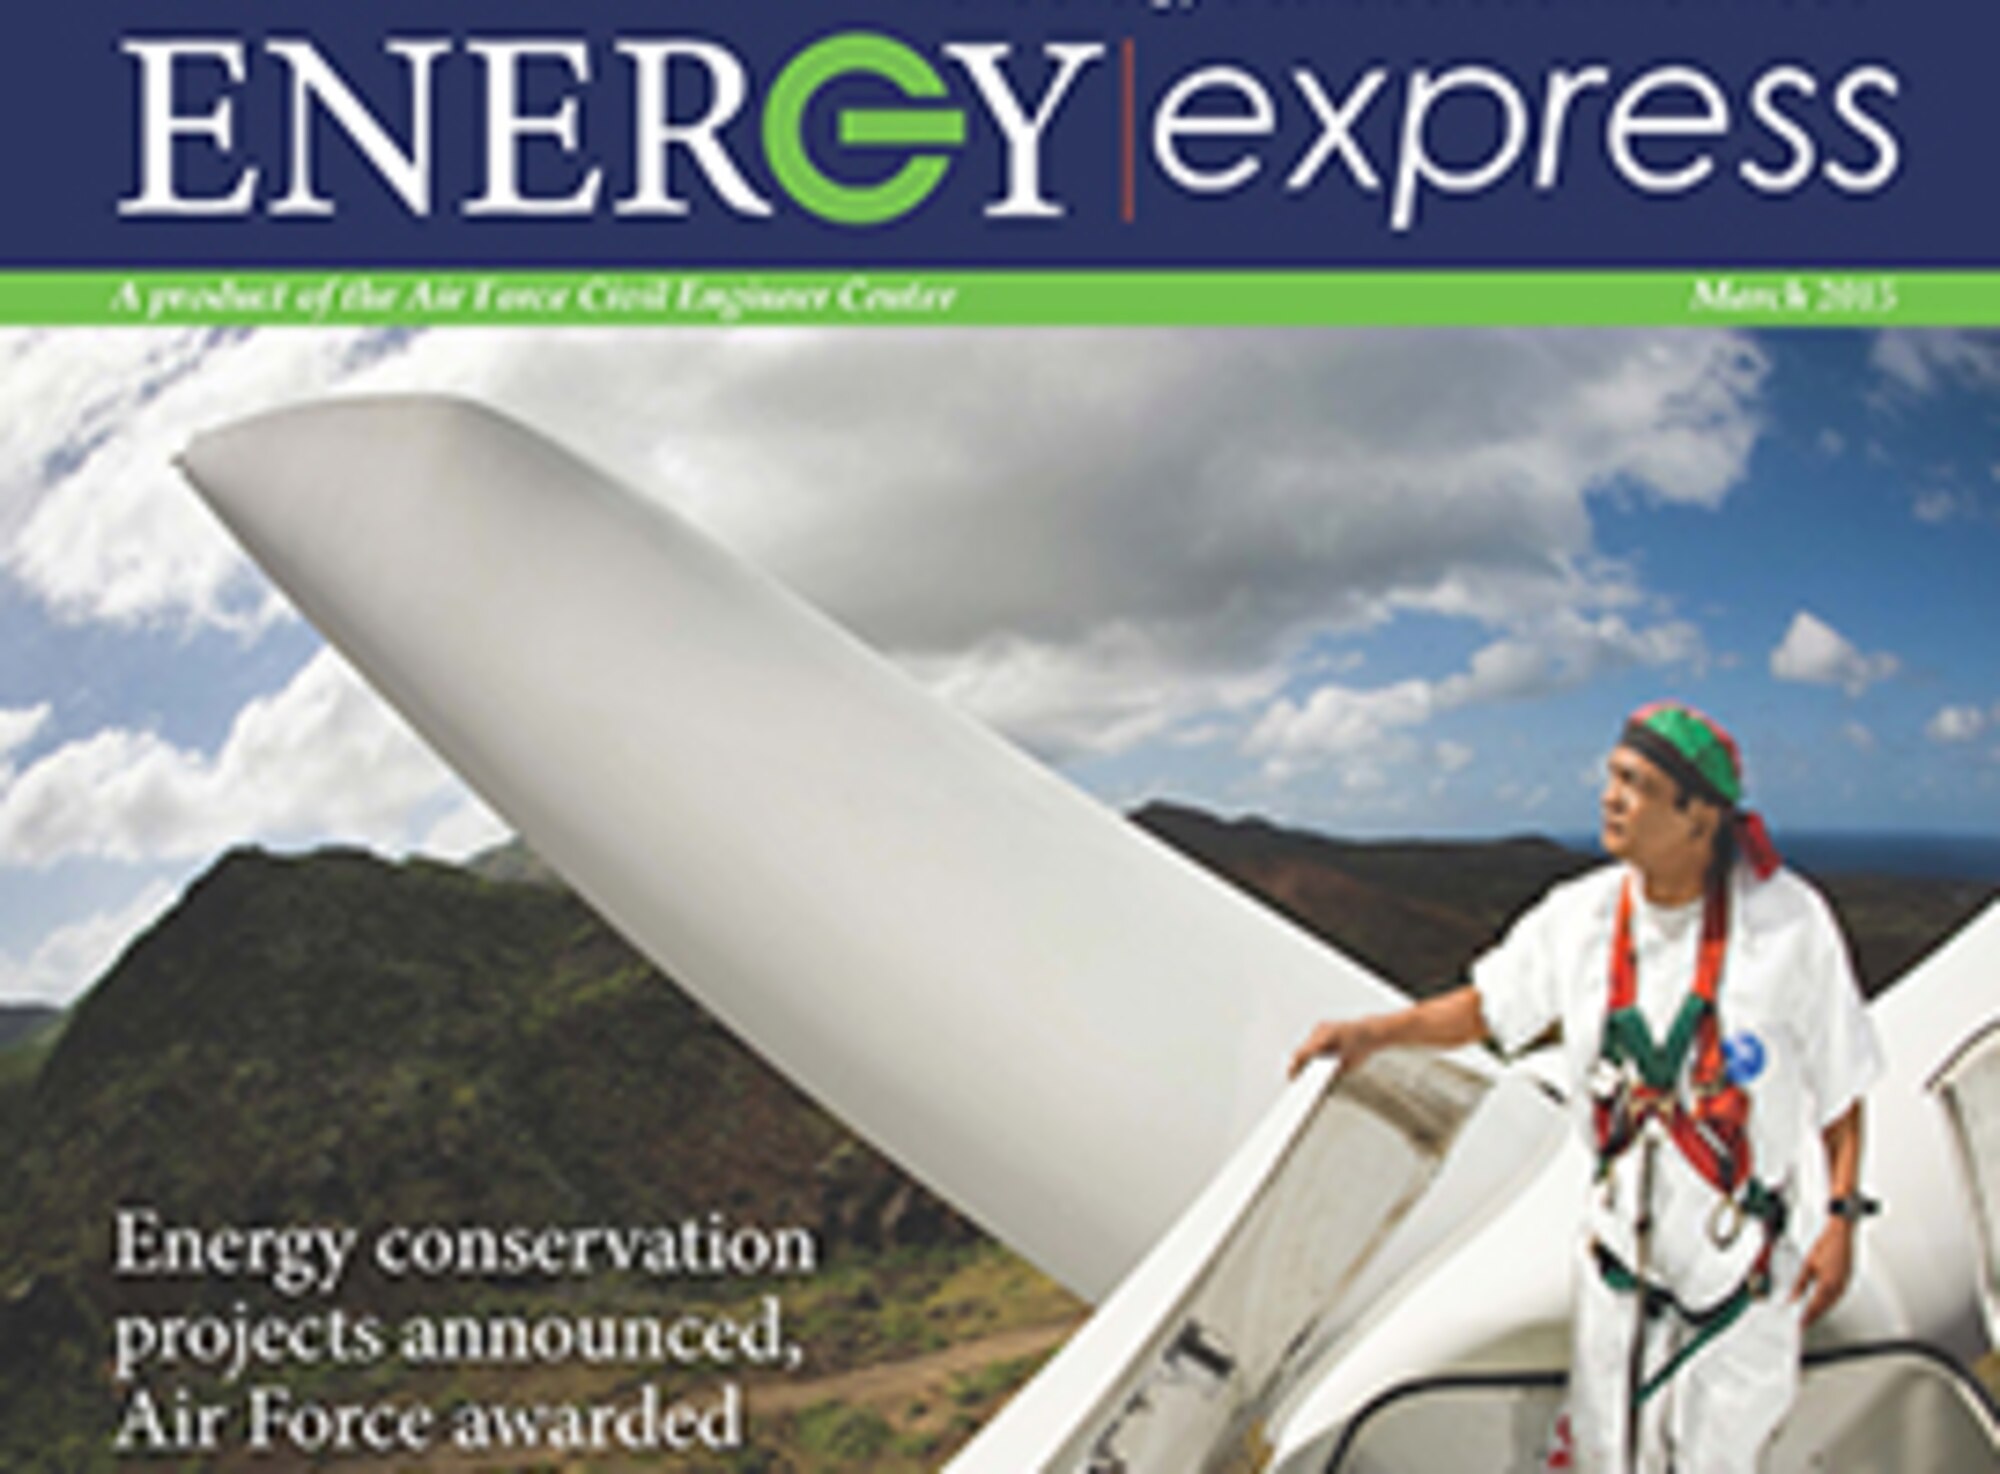 March Energy Express